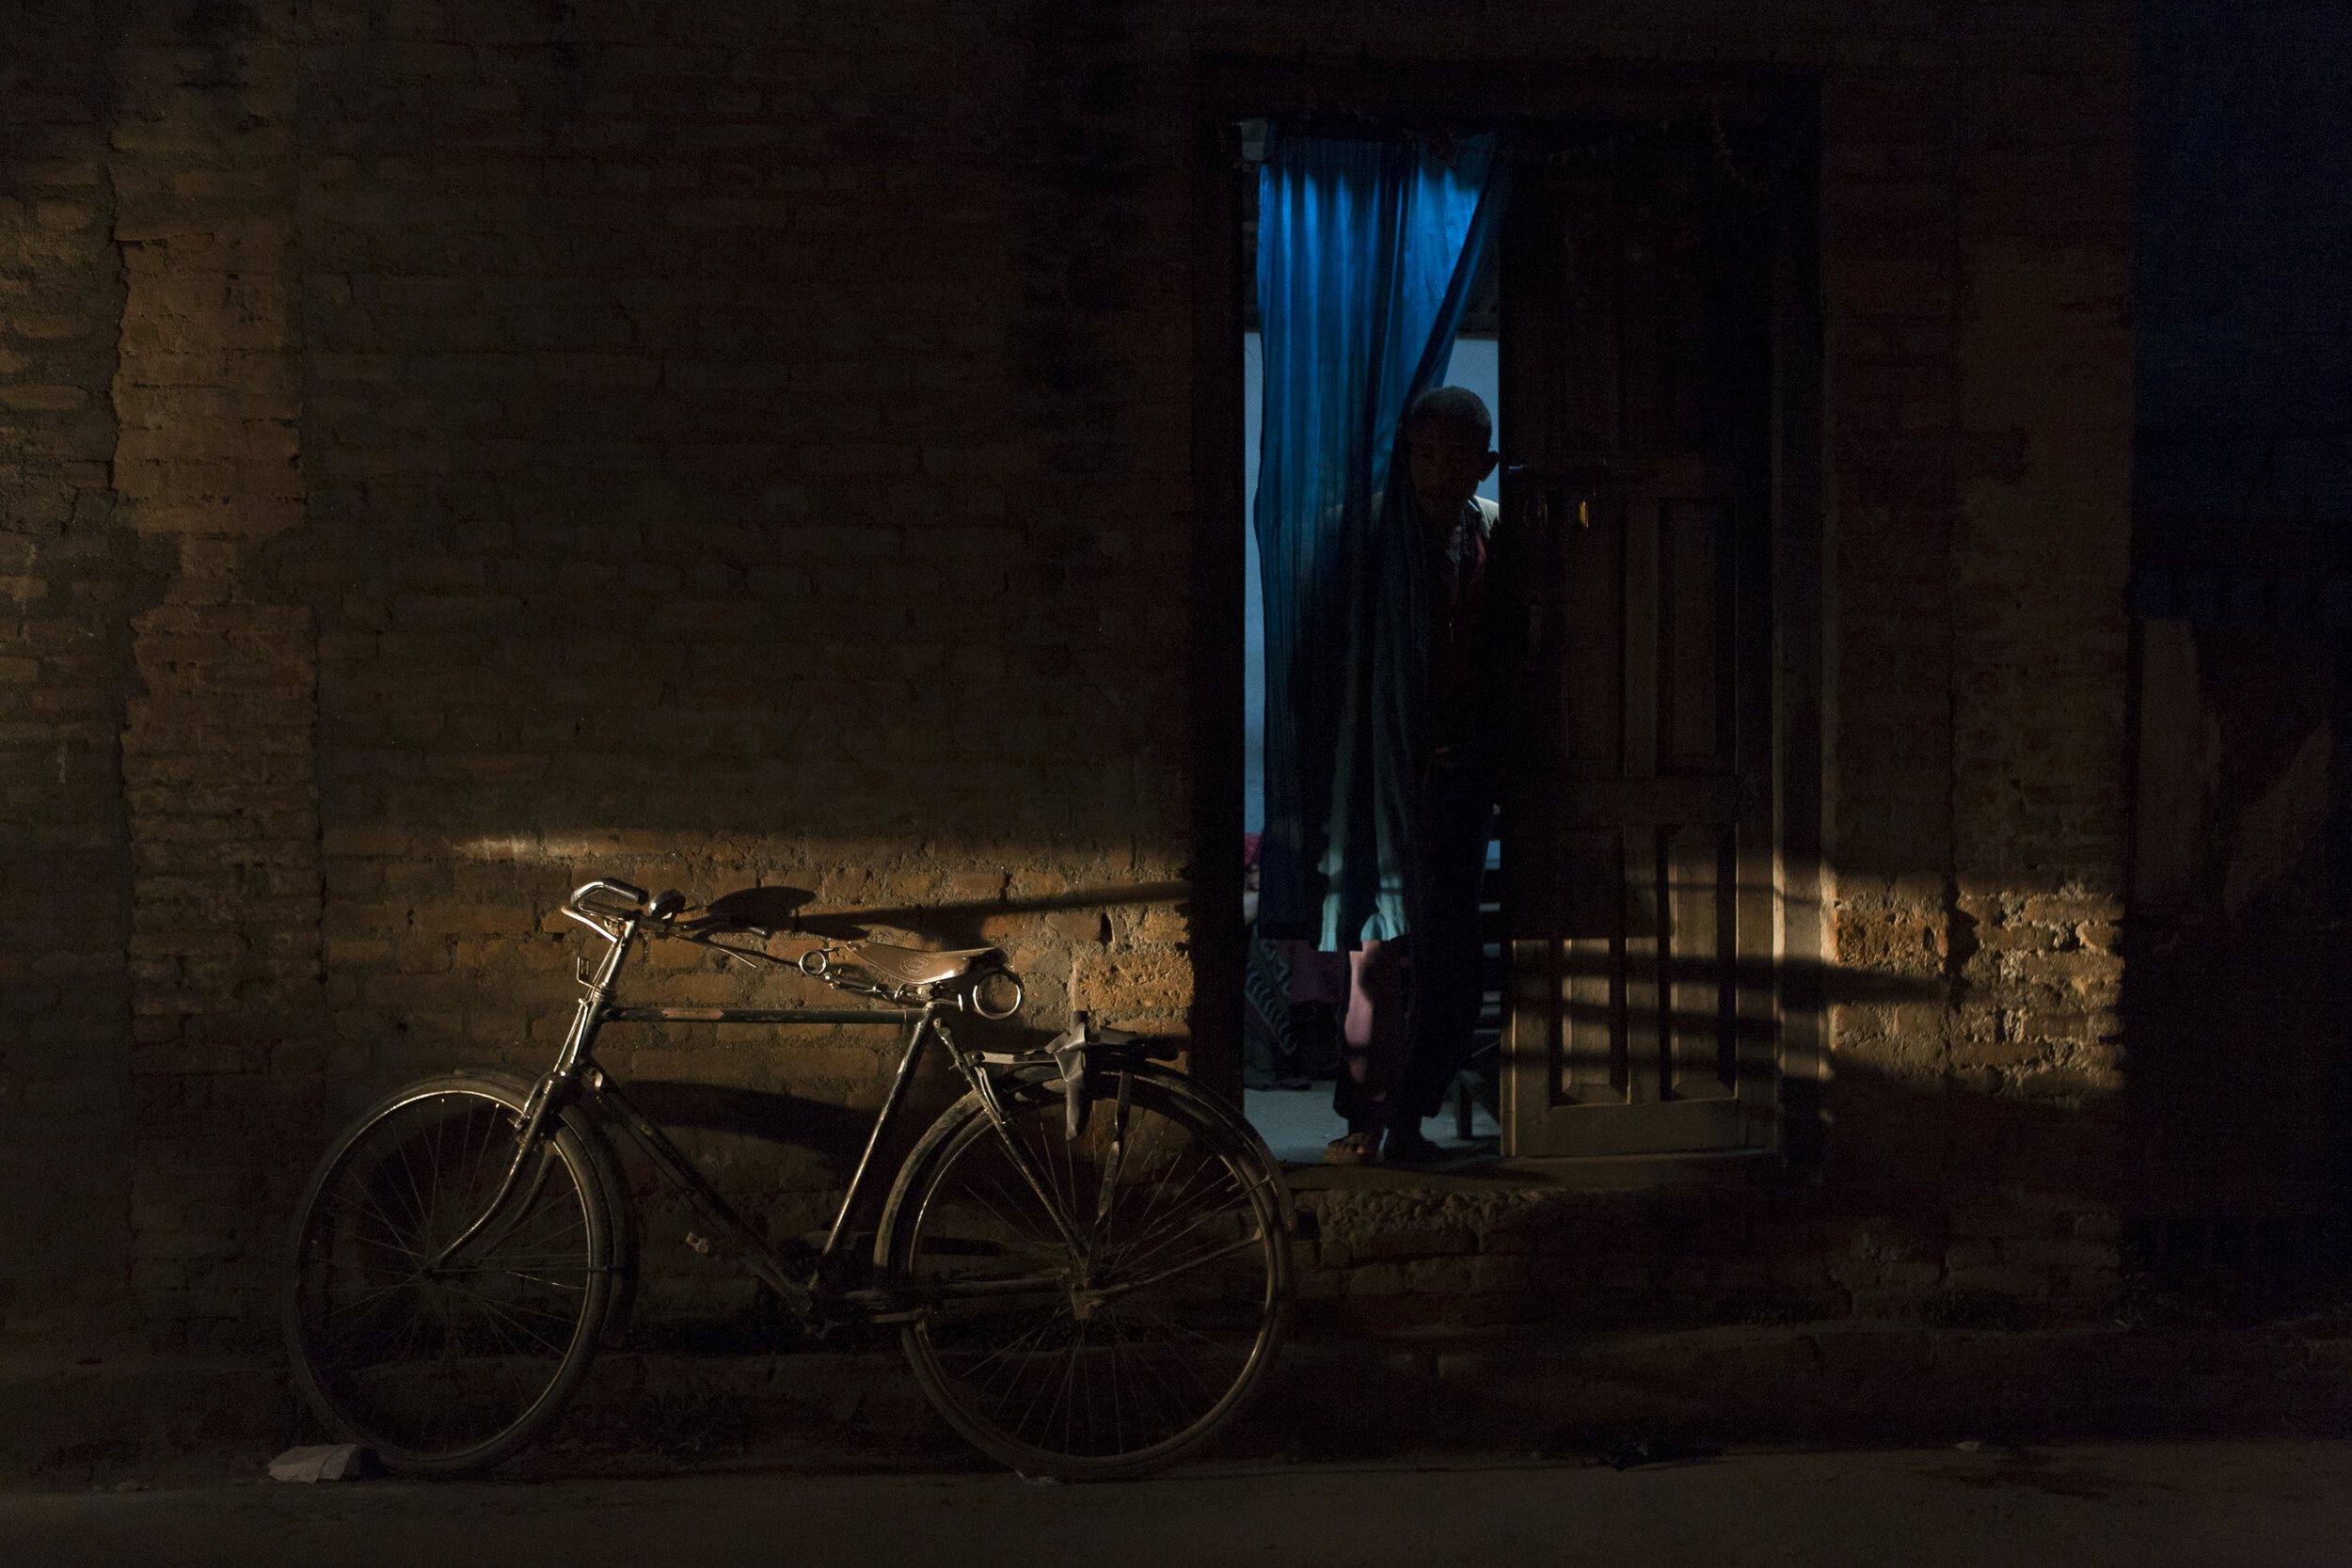  A man looks from his home as a motorcycle lights up a street in the exhaust-filled city of Kathmandu. 